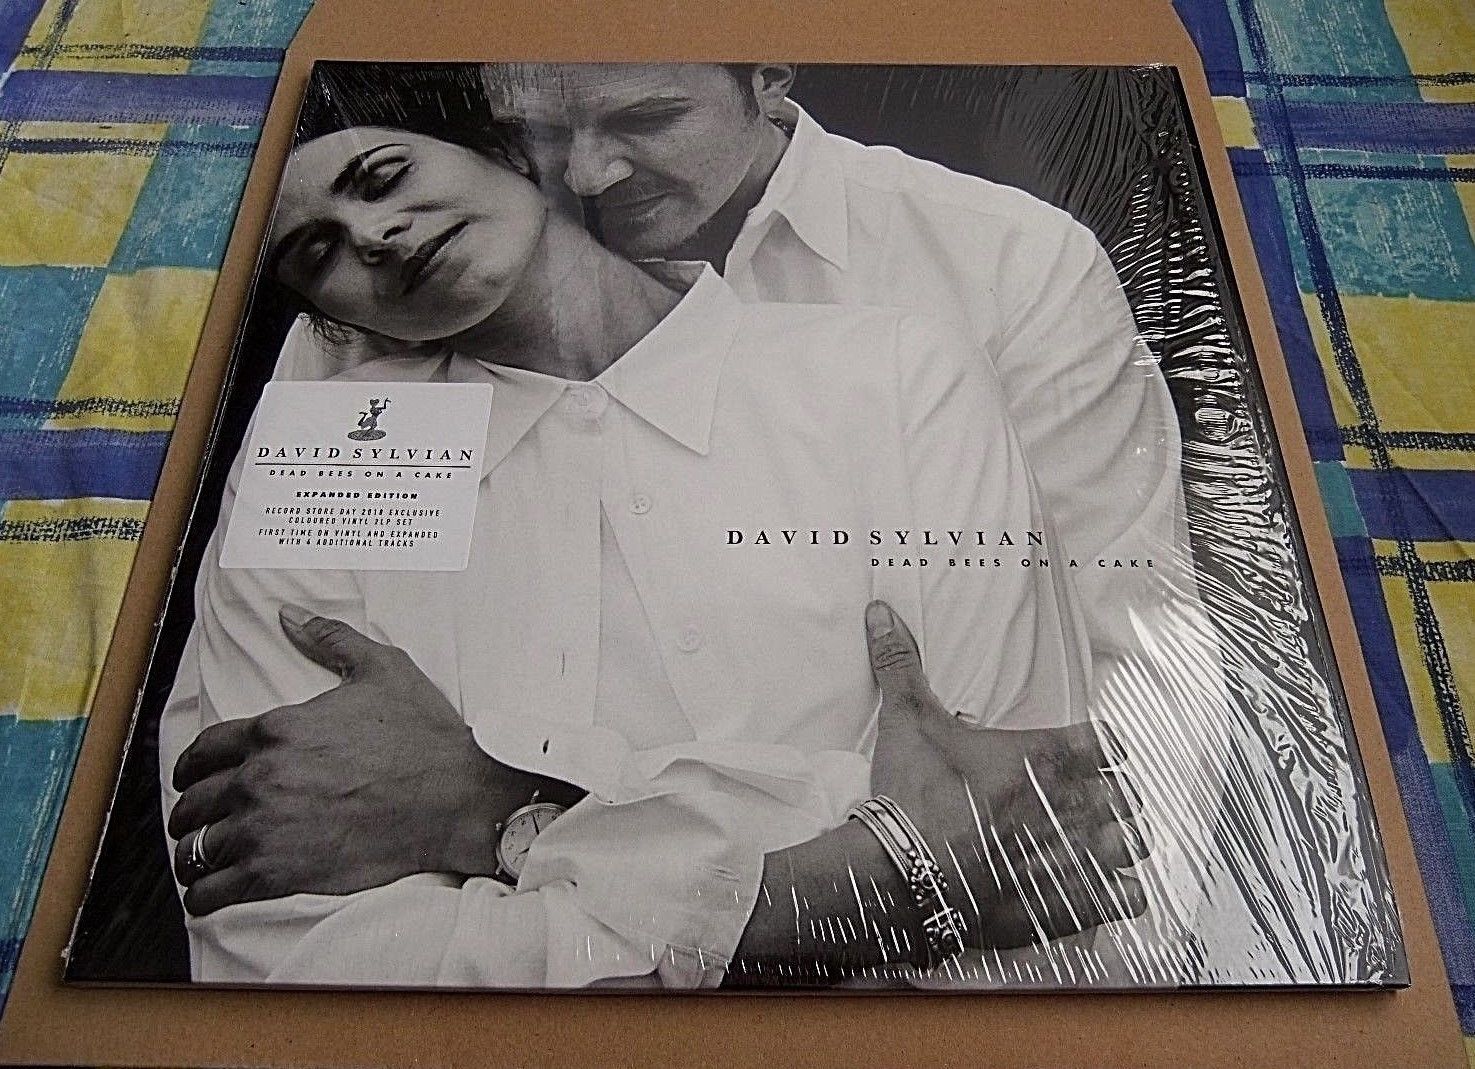 popsike.com - David Sylvian - Dead Bees On A Cake. LP, dble on white vinyl.  RSD 18 issue. - auction details